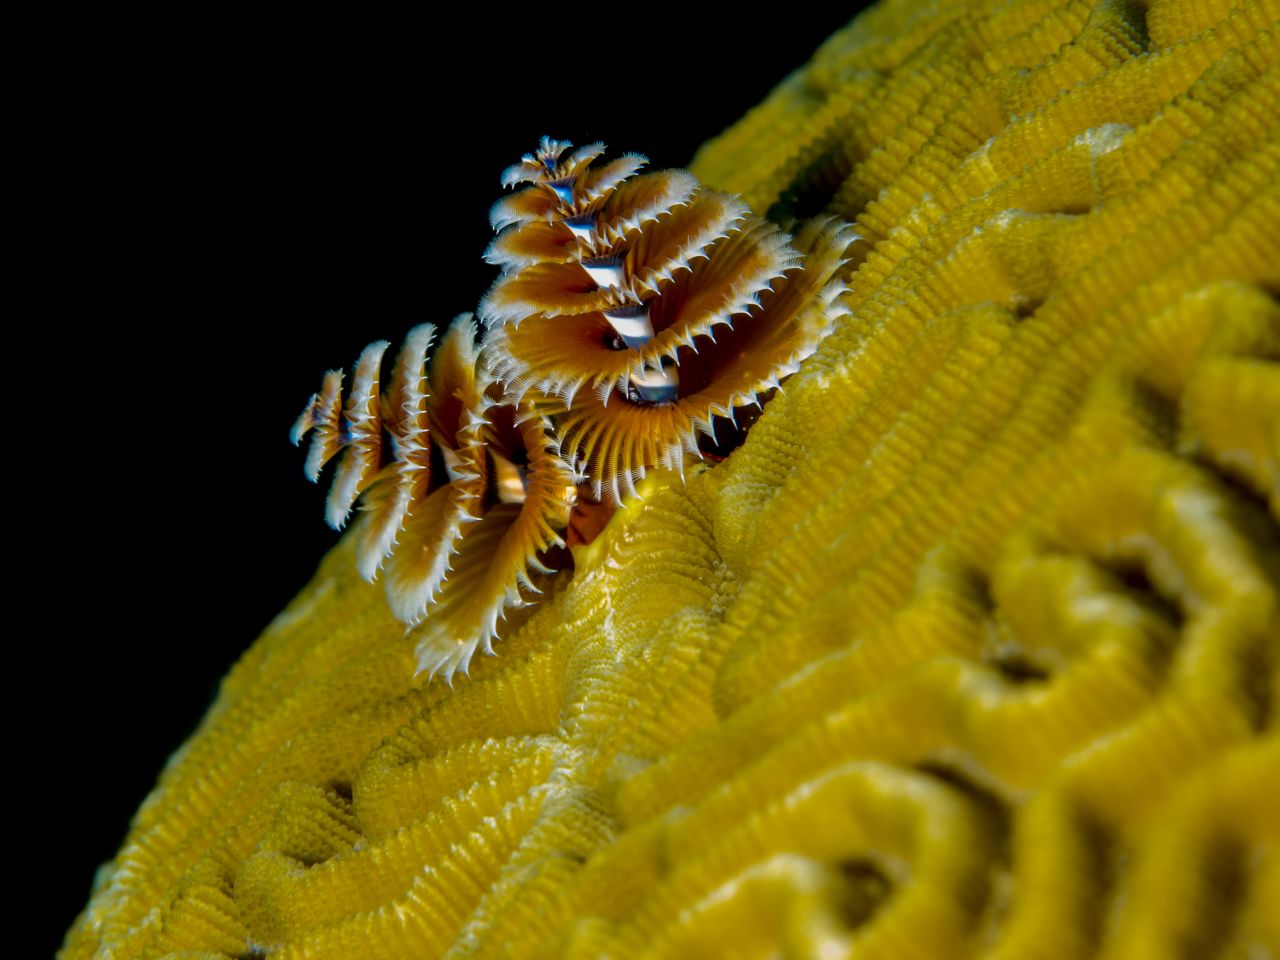 <a href="http://ireport.cnn.com/docs/DOC-1142727">Christmas tree worms</a> get festive on top of brain coral in the waters of Cozumel, Mexico, where reefs offer divers an opportunity to photograph a variety of sea life.